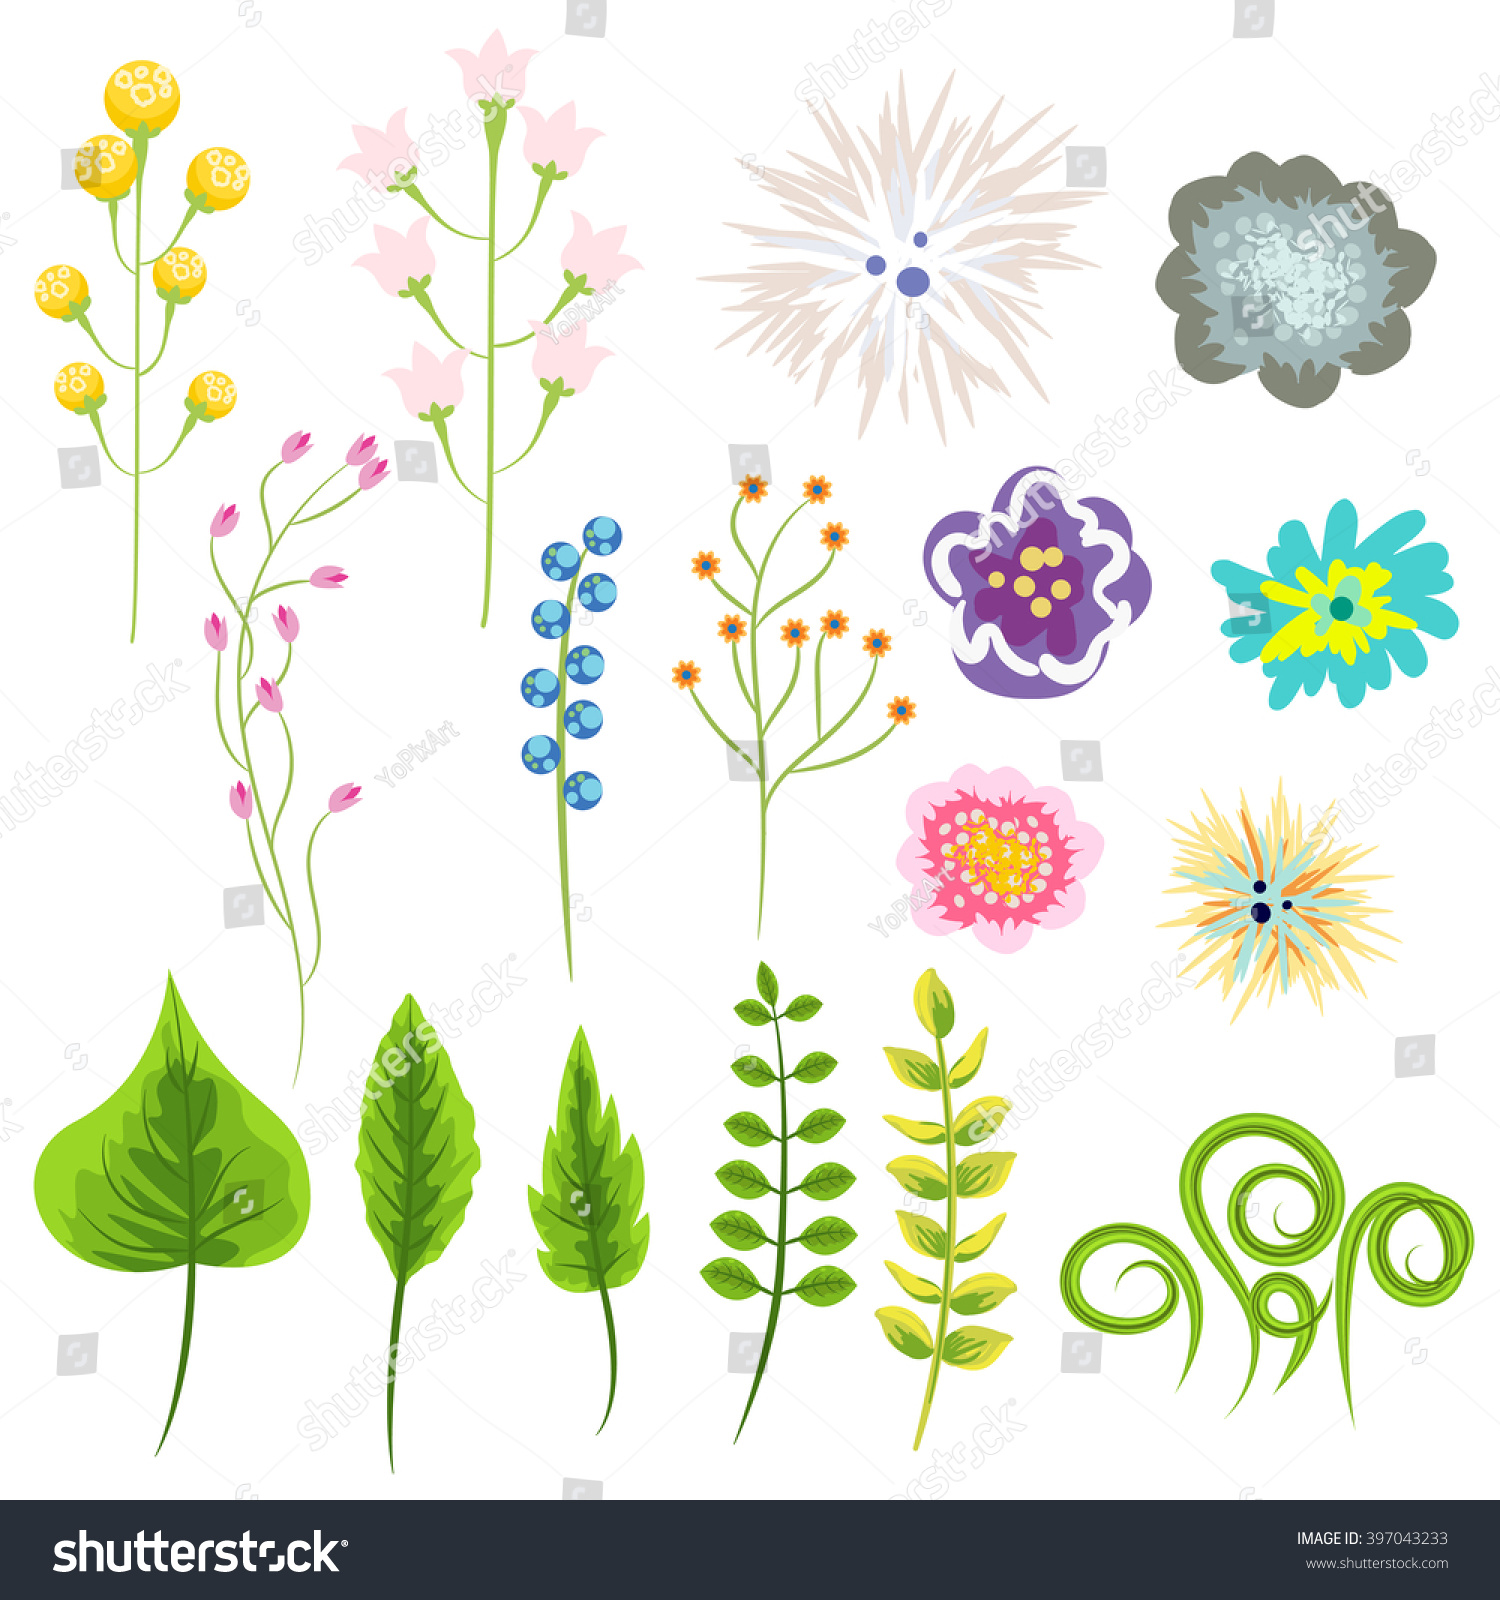 clipart flowers and leaves - photo #19